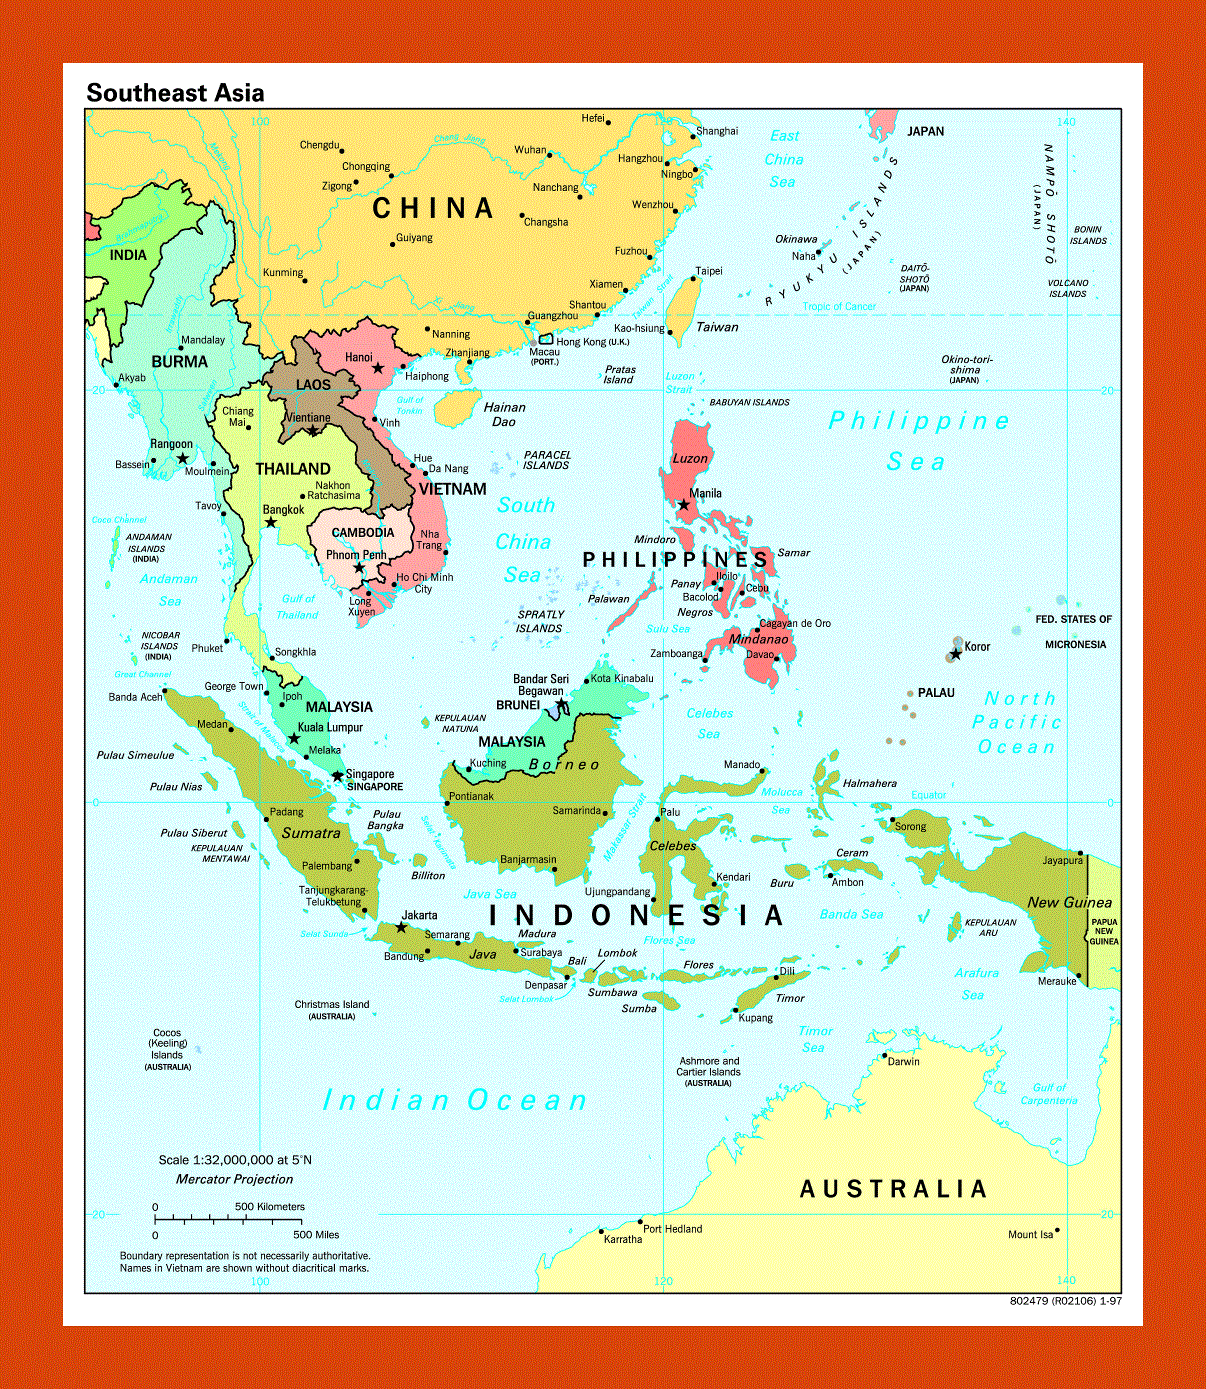 Political map of Southeast Asia - 1997